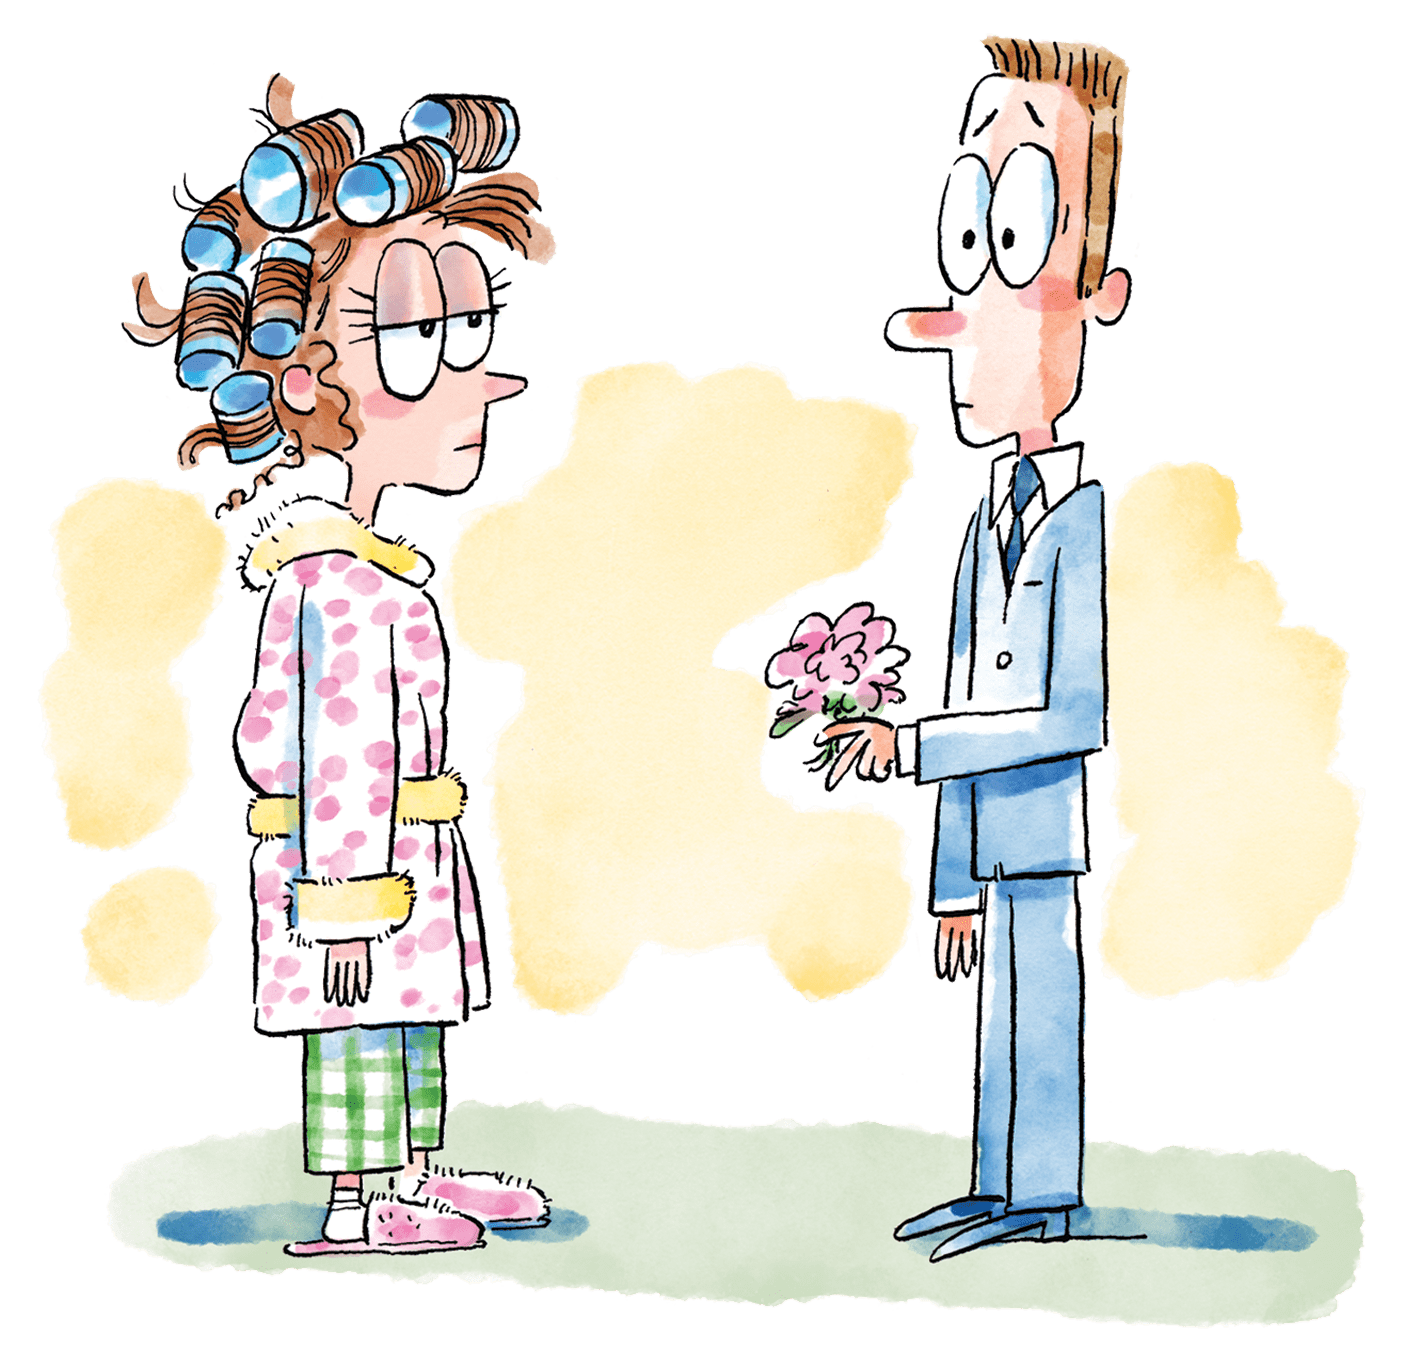 A young woman, hair in curlers and wearing a robe, greets a young man in a powder blue suit holding flowers.